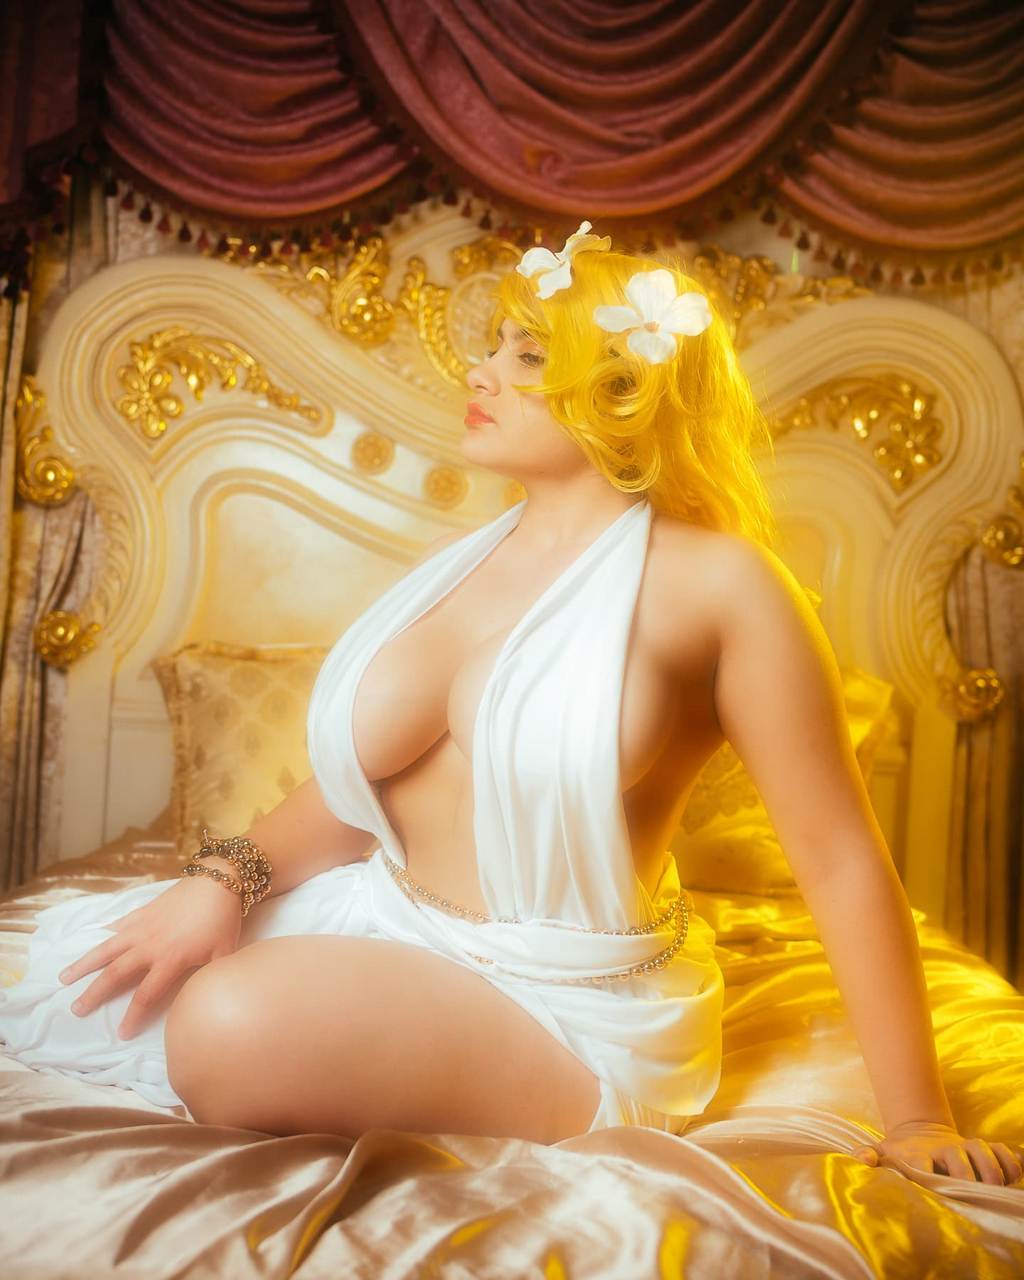 Aphrodite From Record Of Ragnarok By Luckofthelion M